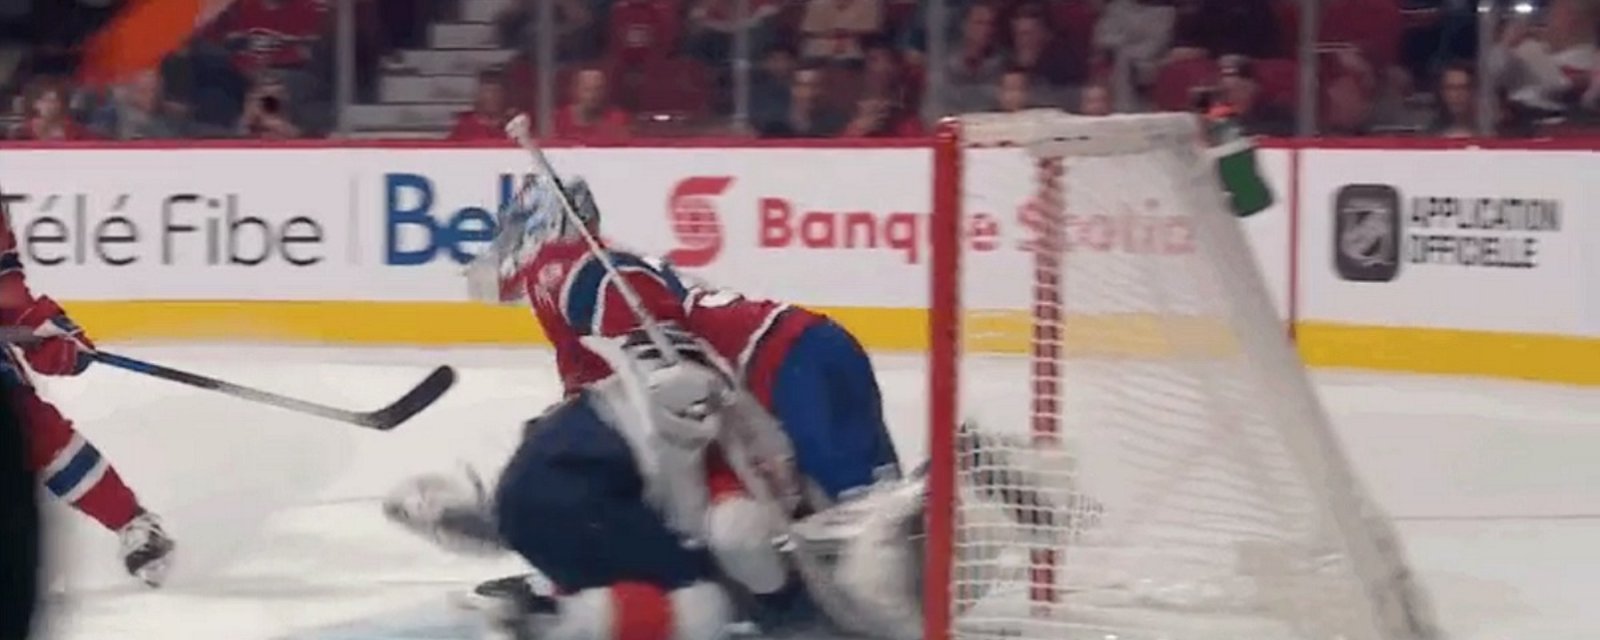 Young Habs goalie gets bulldozed into his own net, goal still counts.